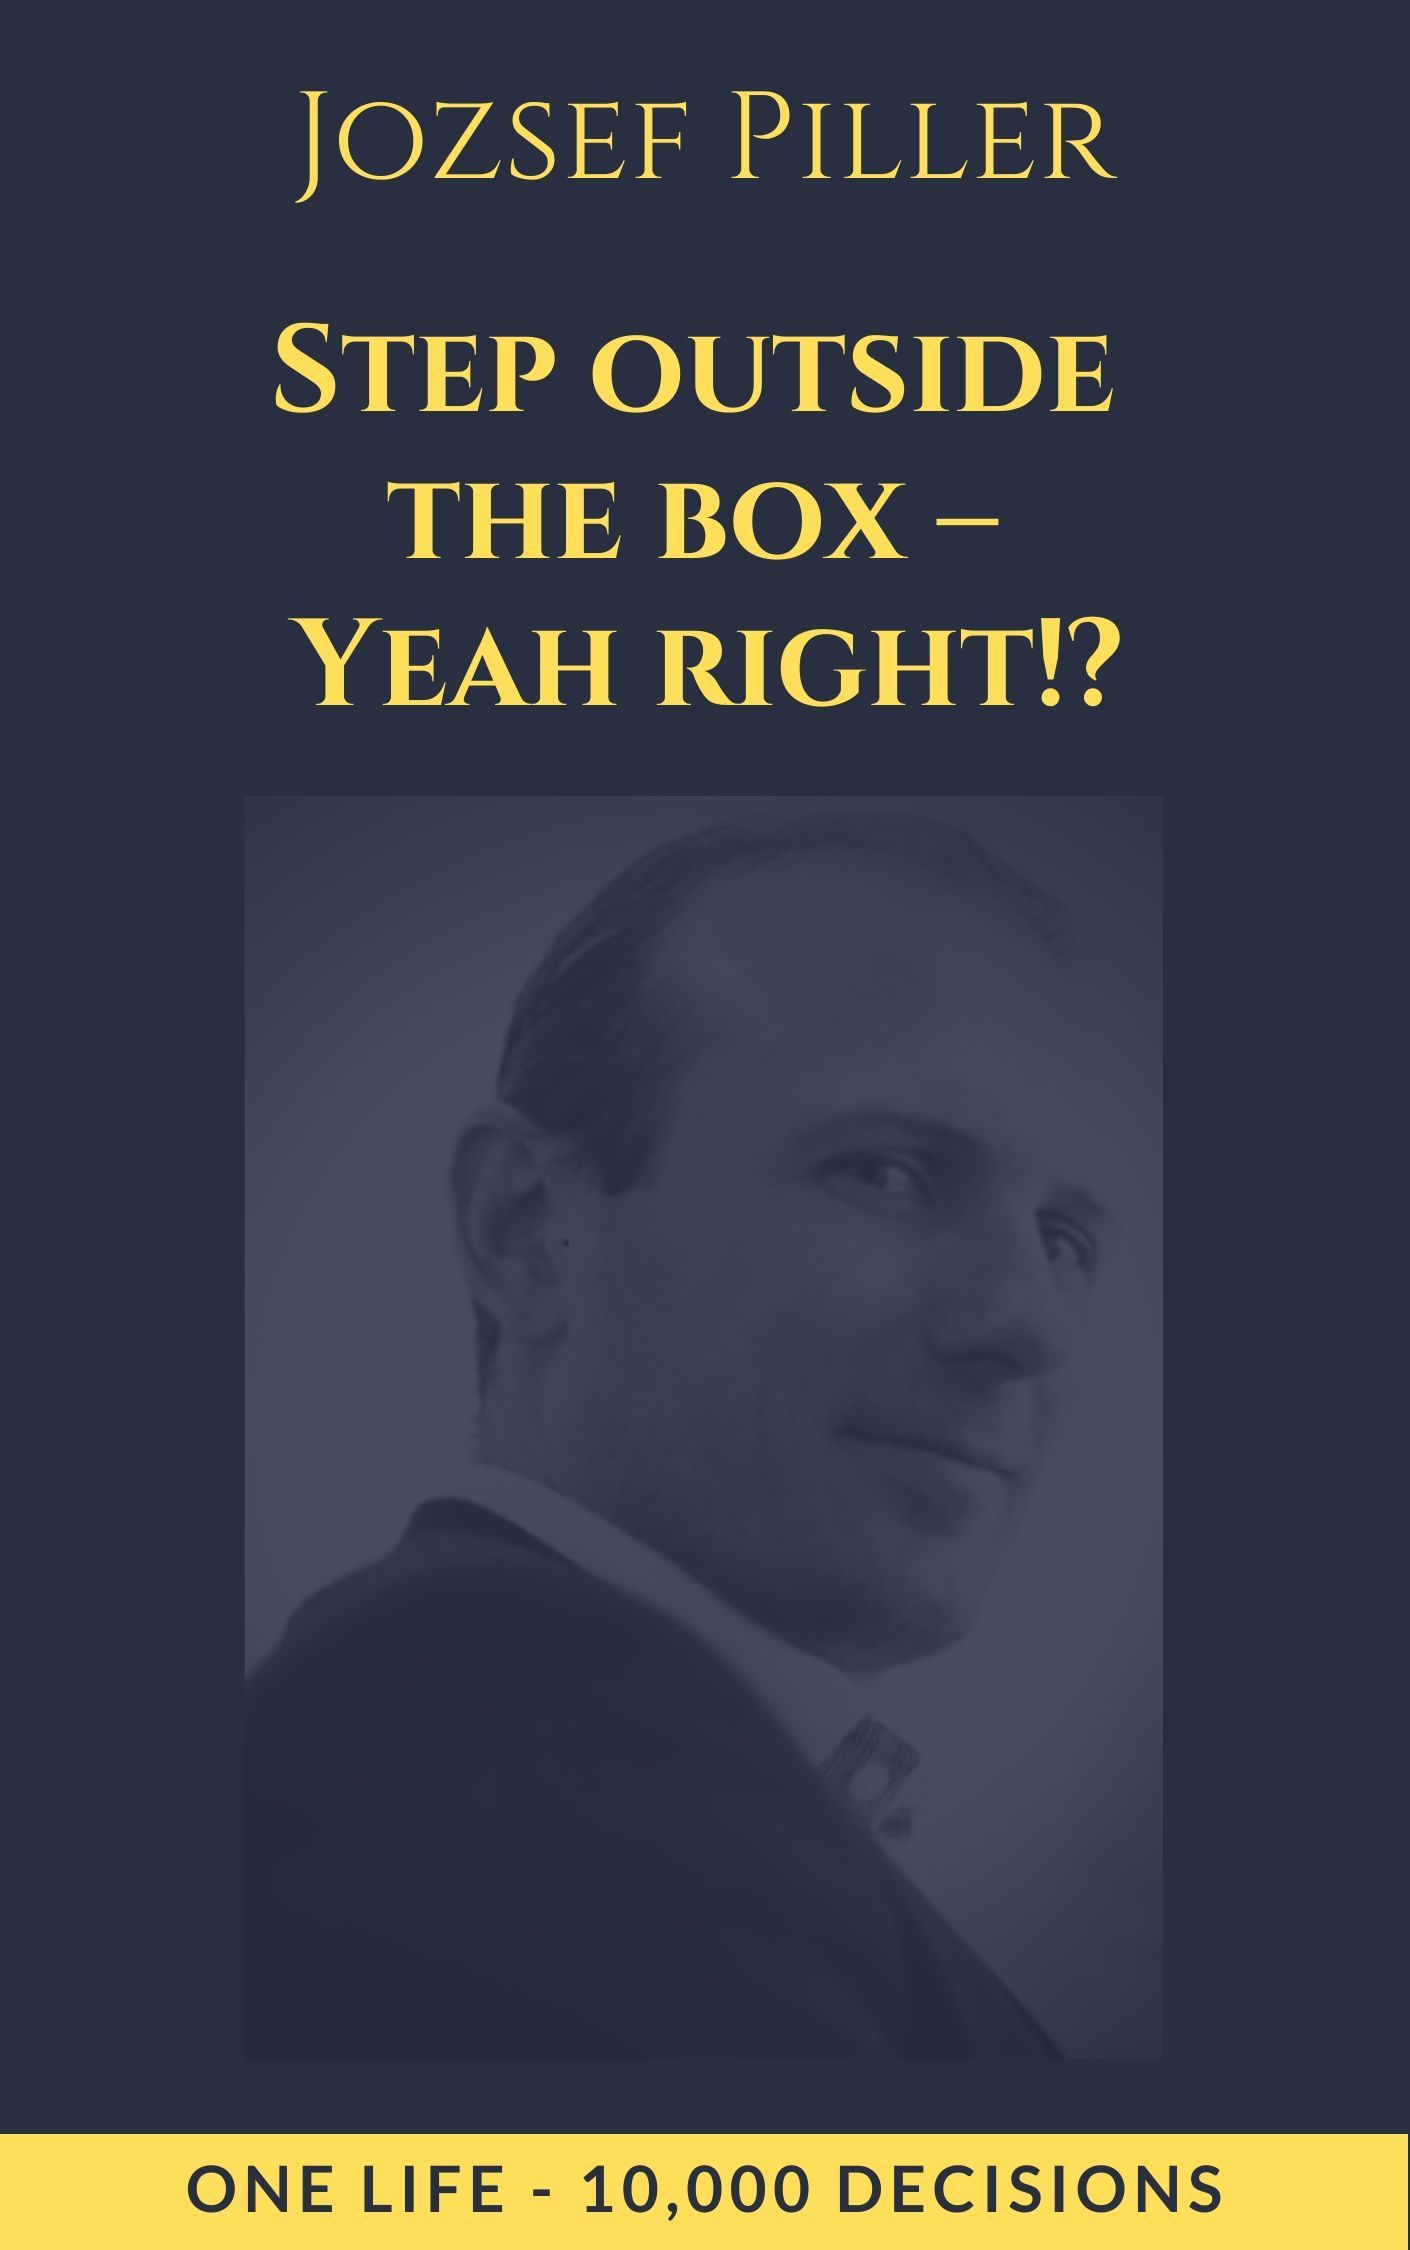 Step outside the box - Yeah right!?, eBook by Jozsef Piller